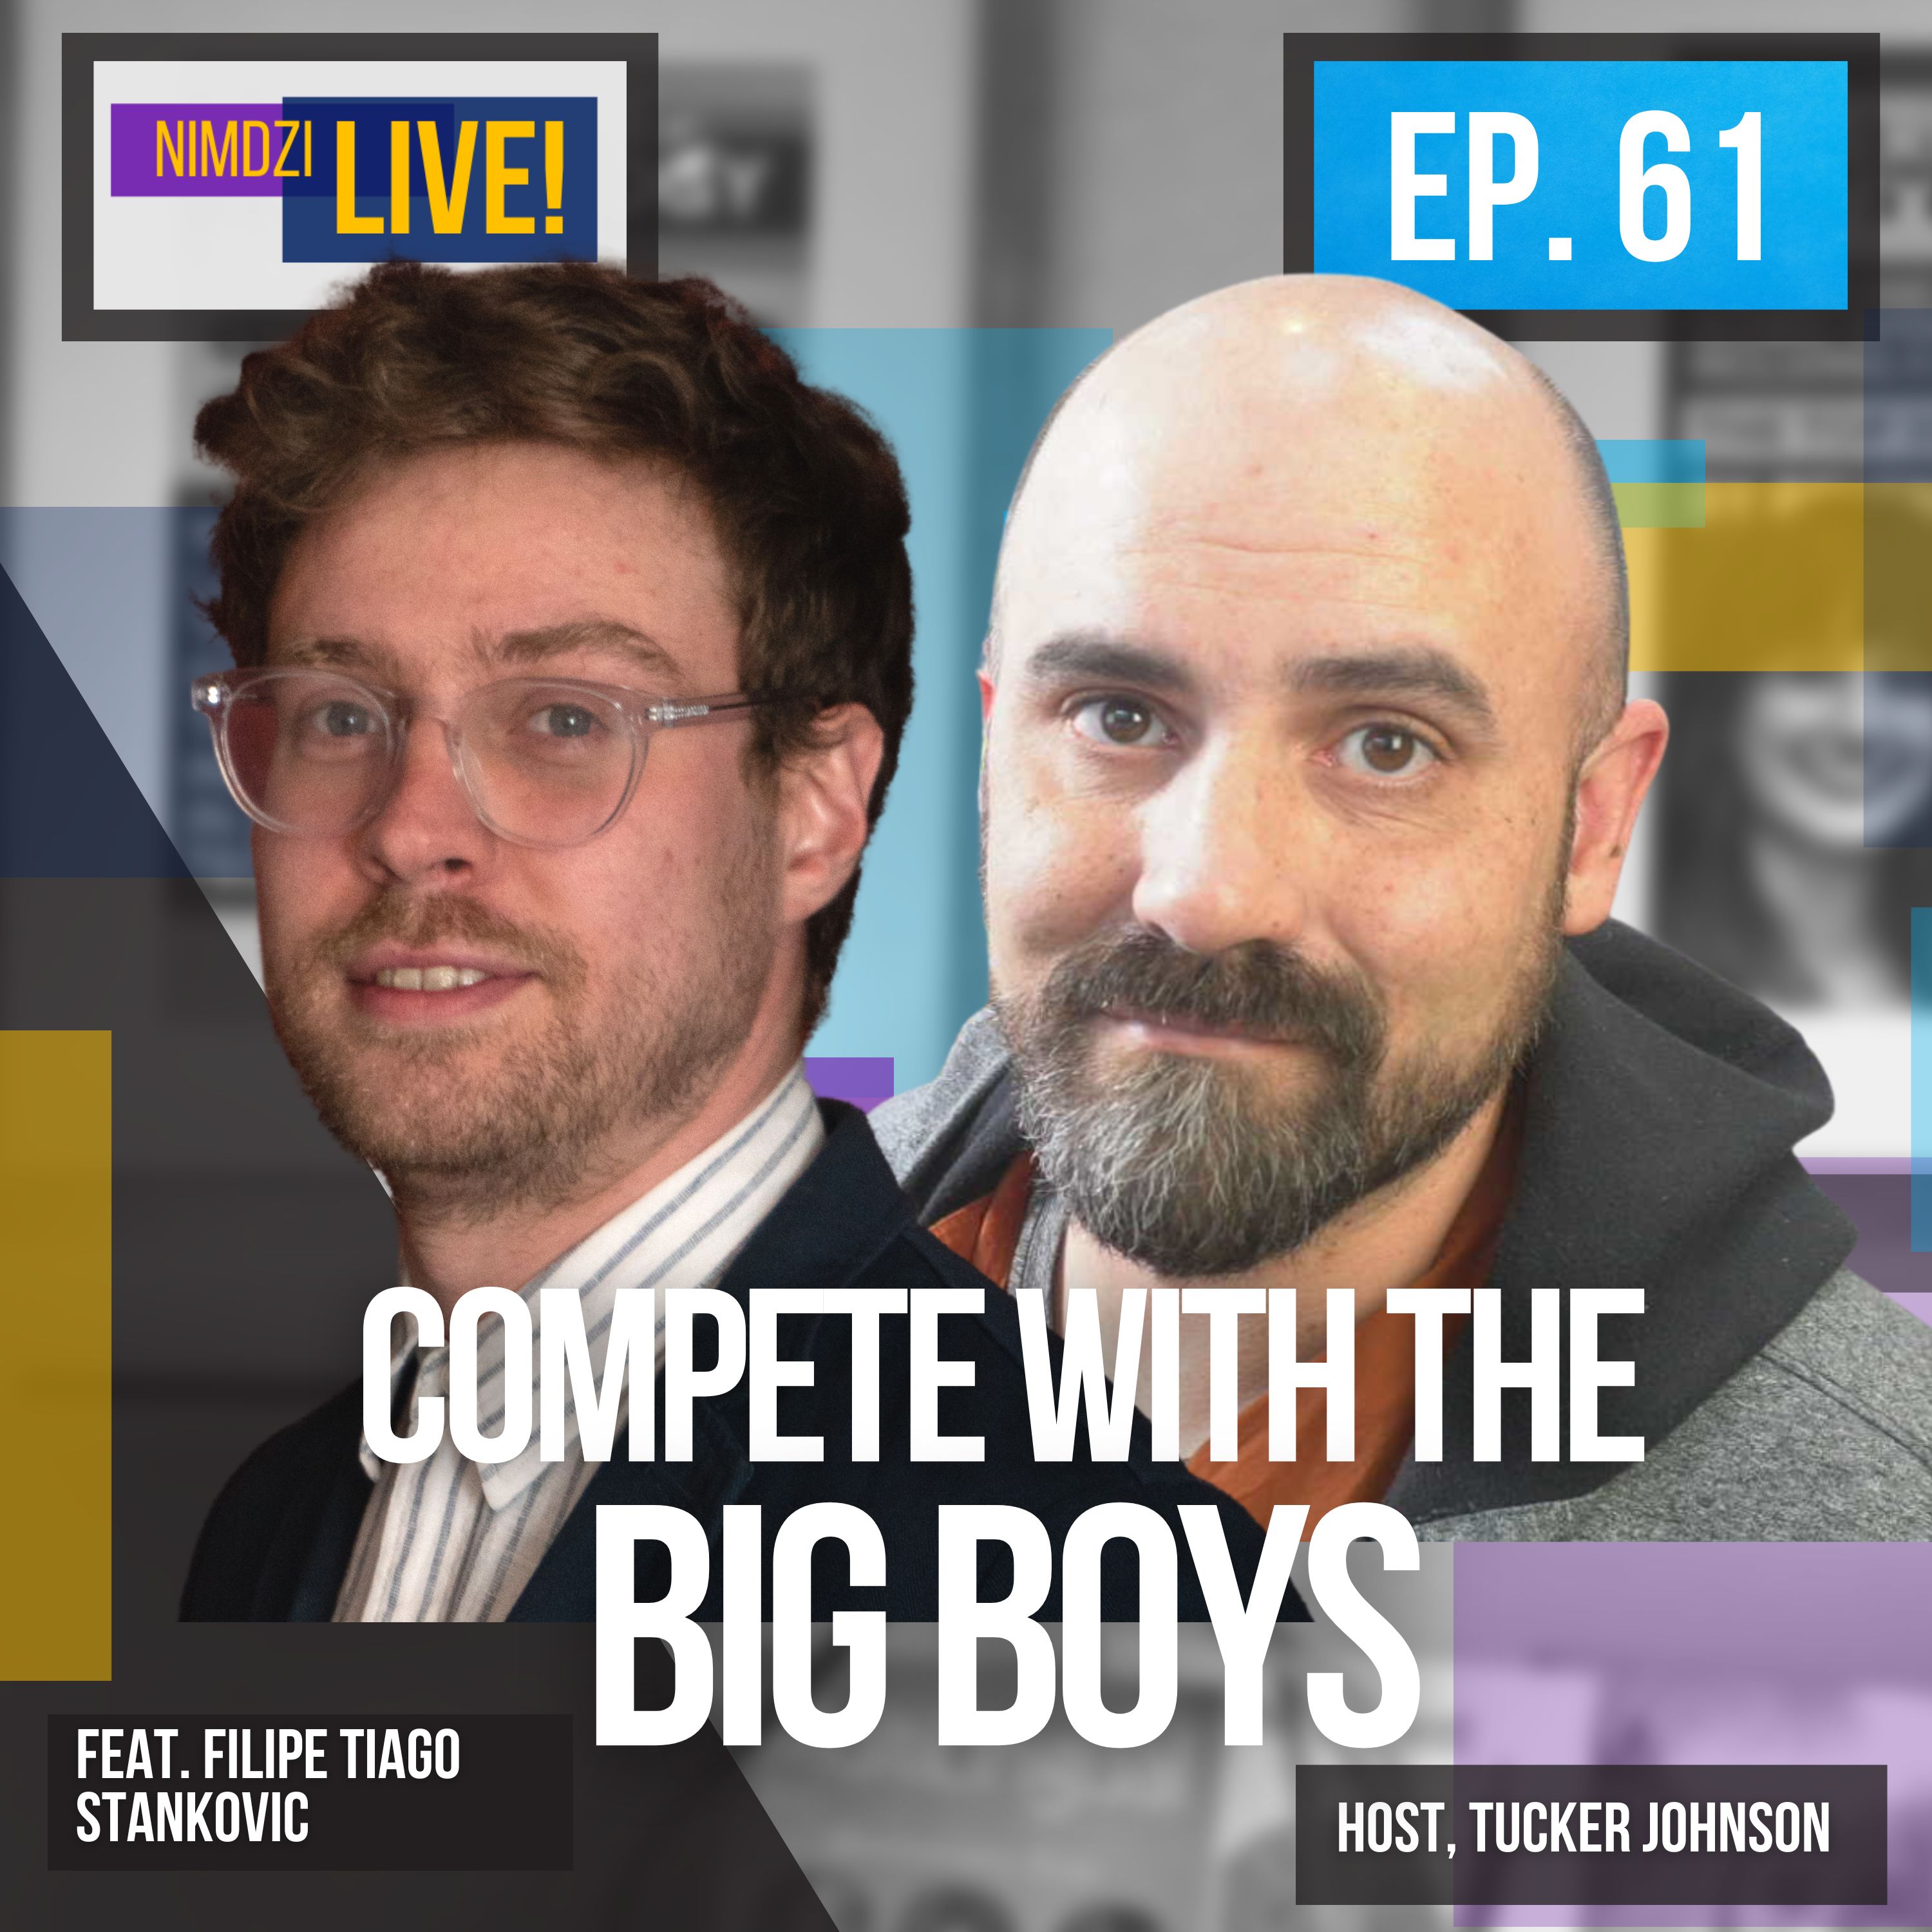 Competing with the big boys (feat. Filipe Tiago Stankovic)